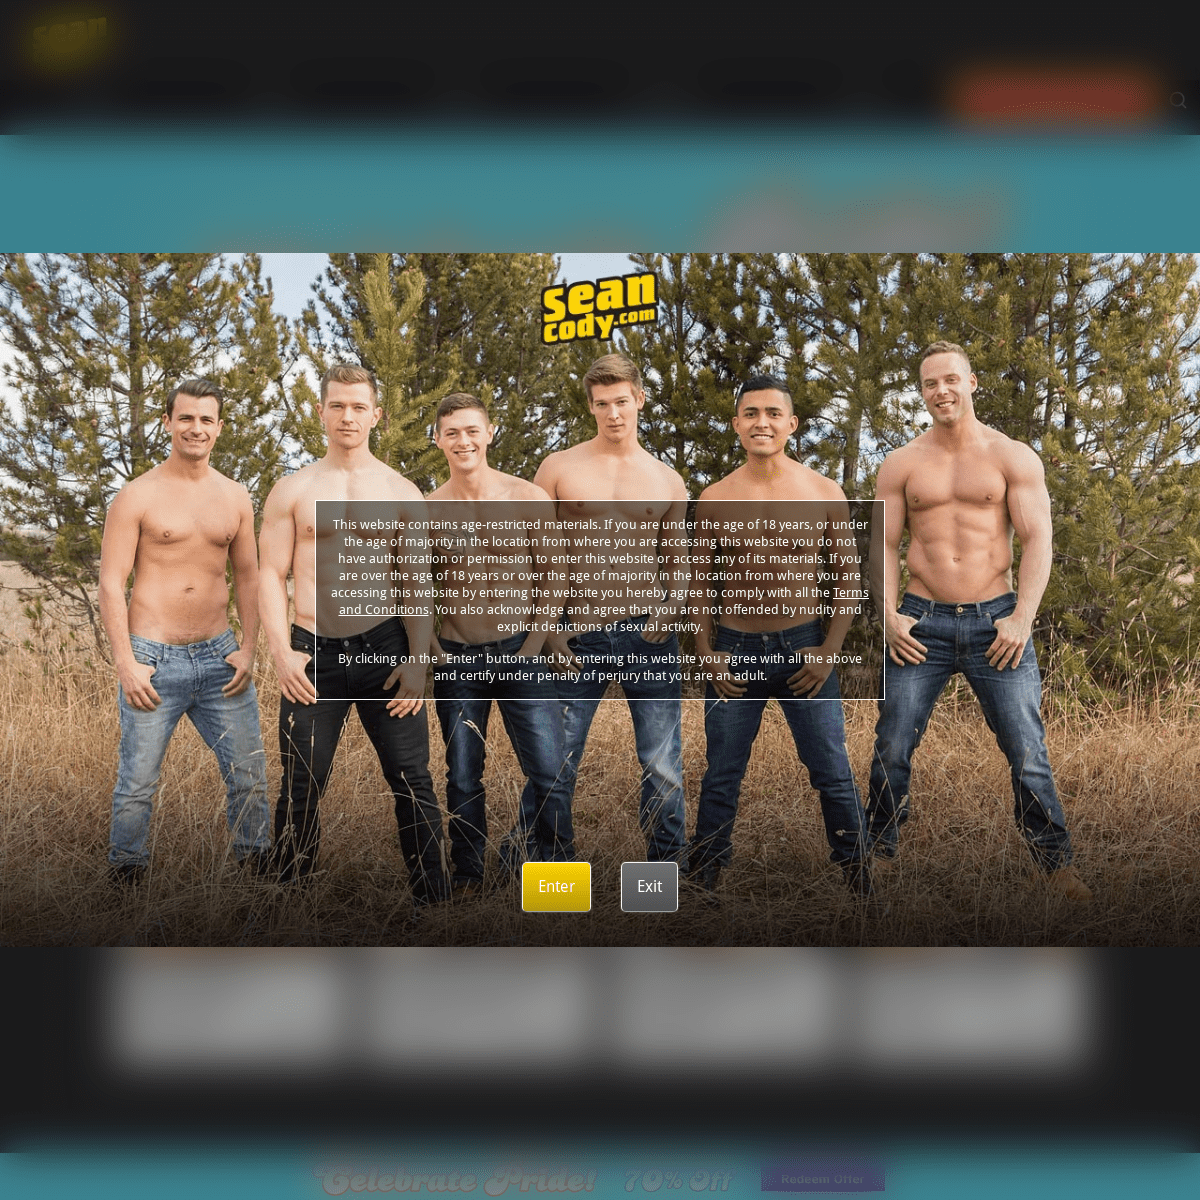 A complete backup of https://seancody.com